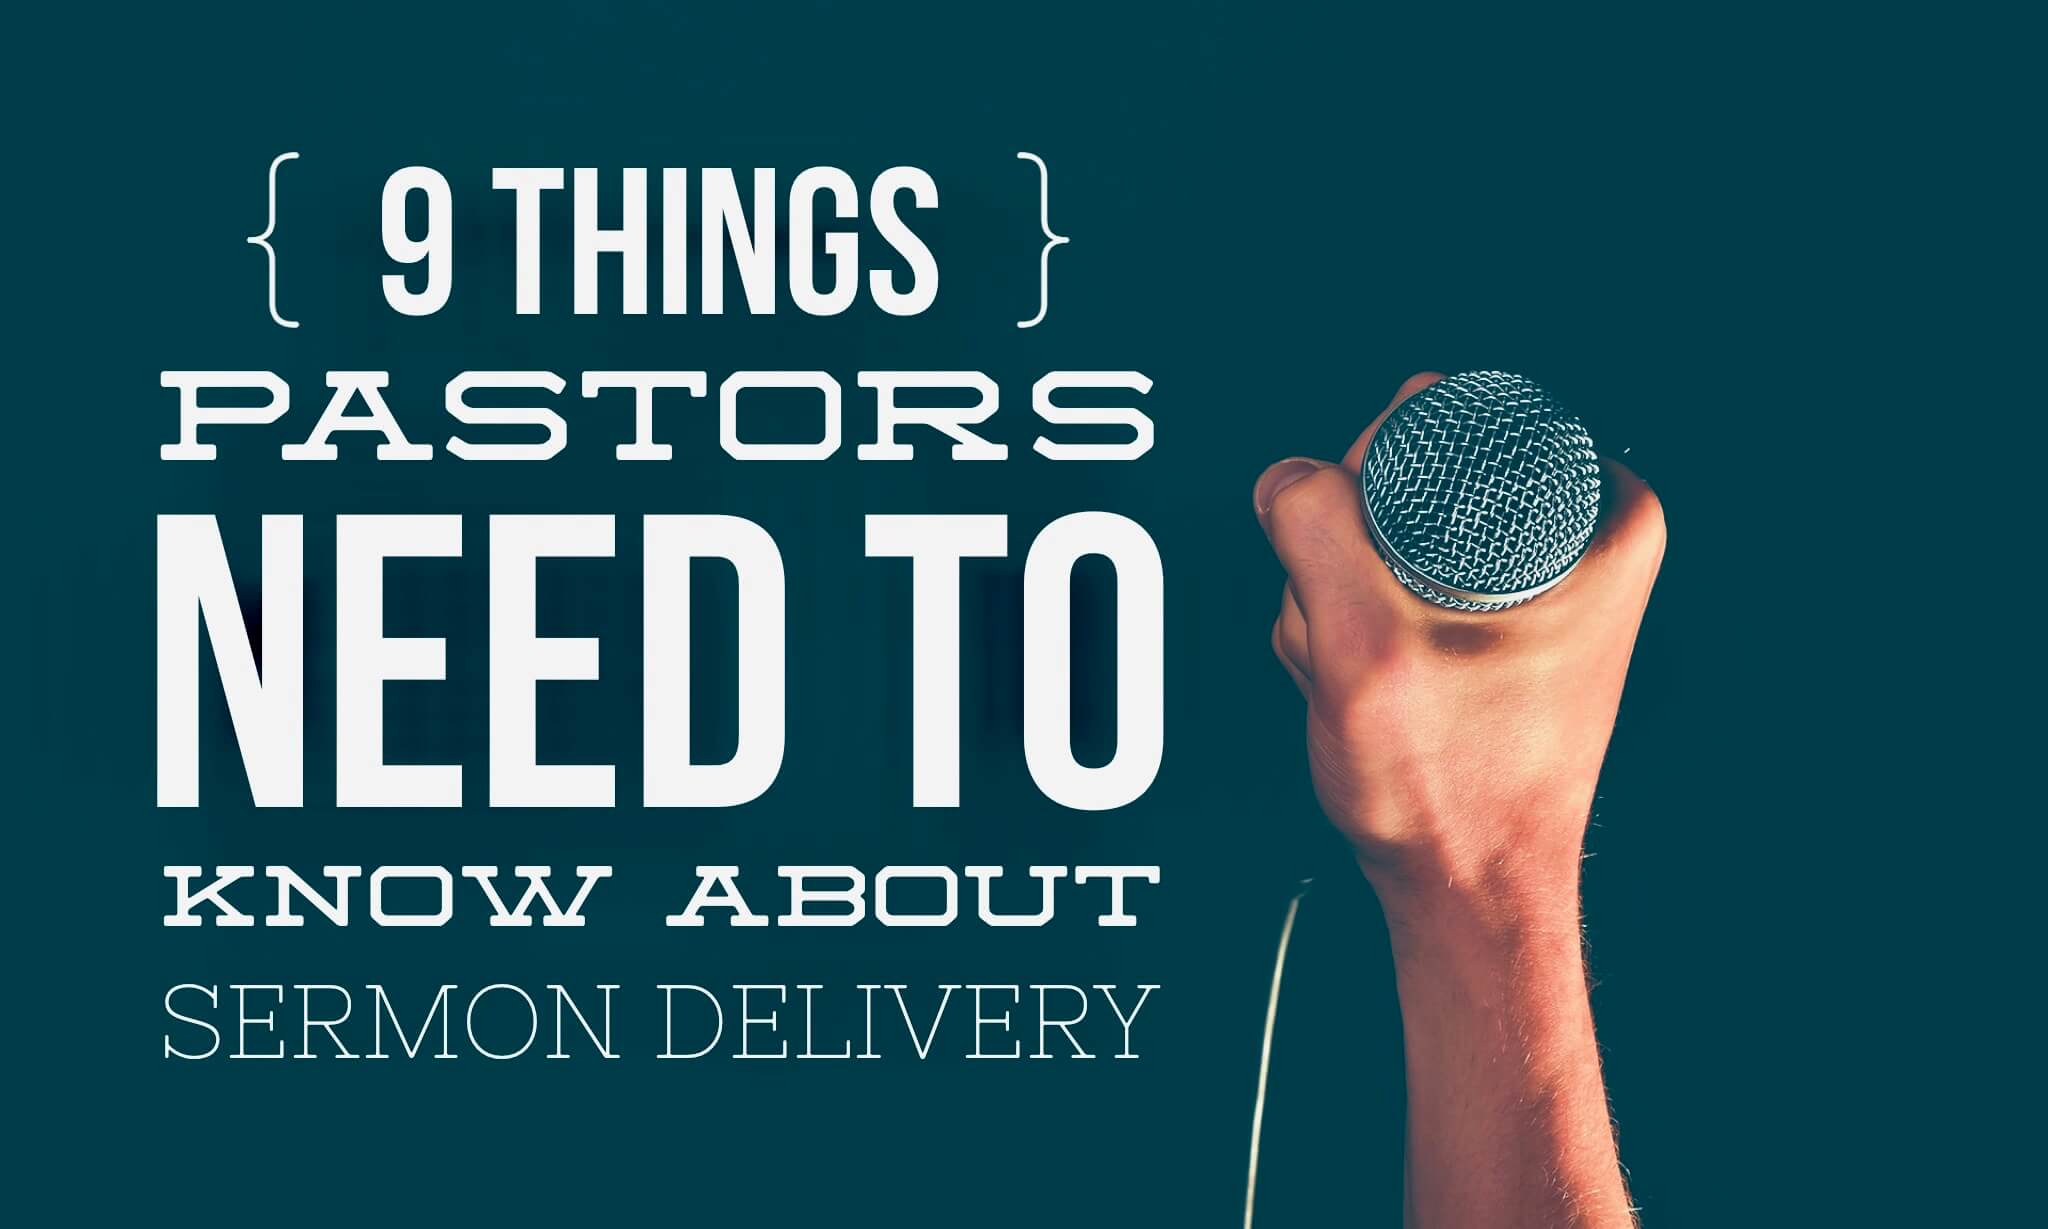 9 things pastors need to know about sermon delivery, preaching